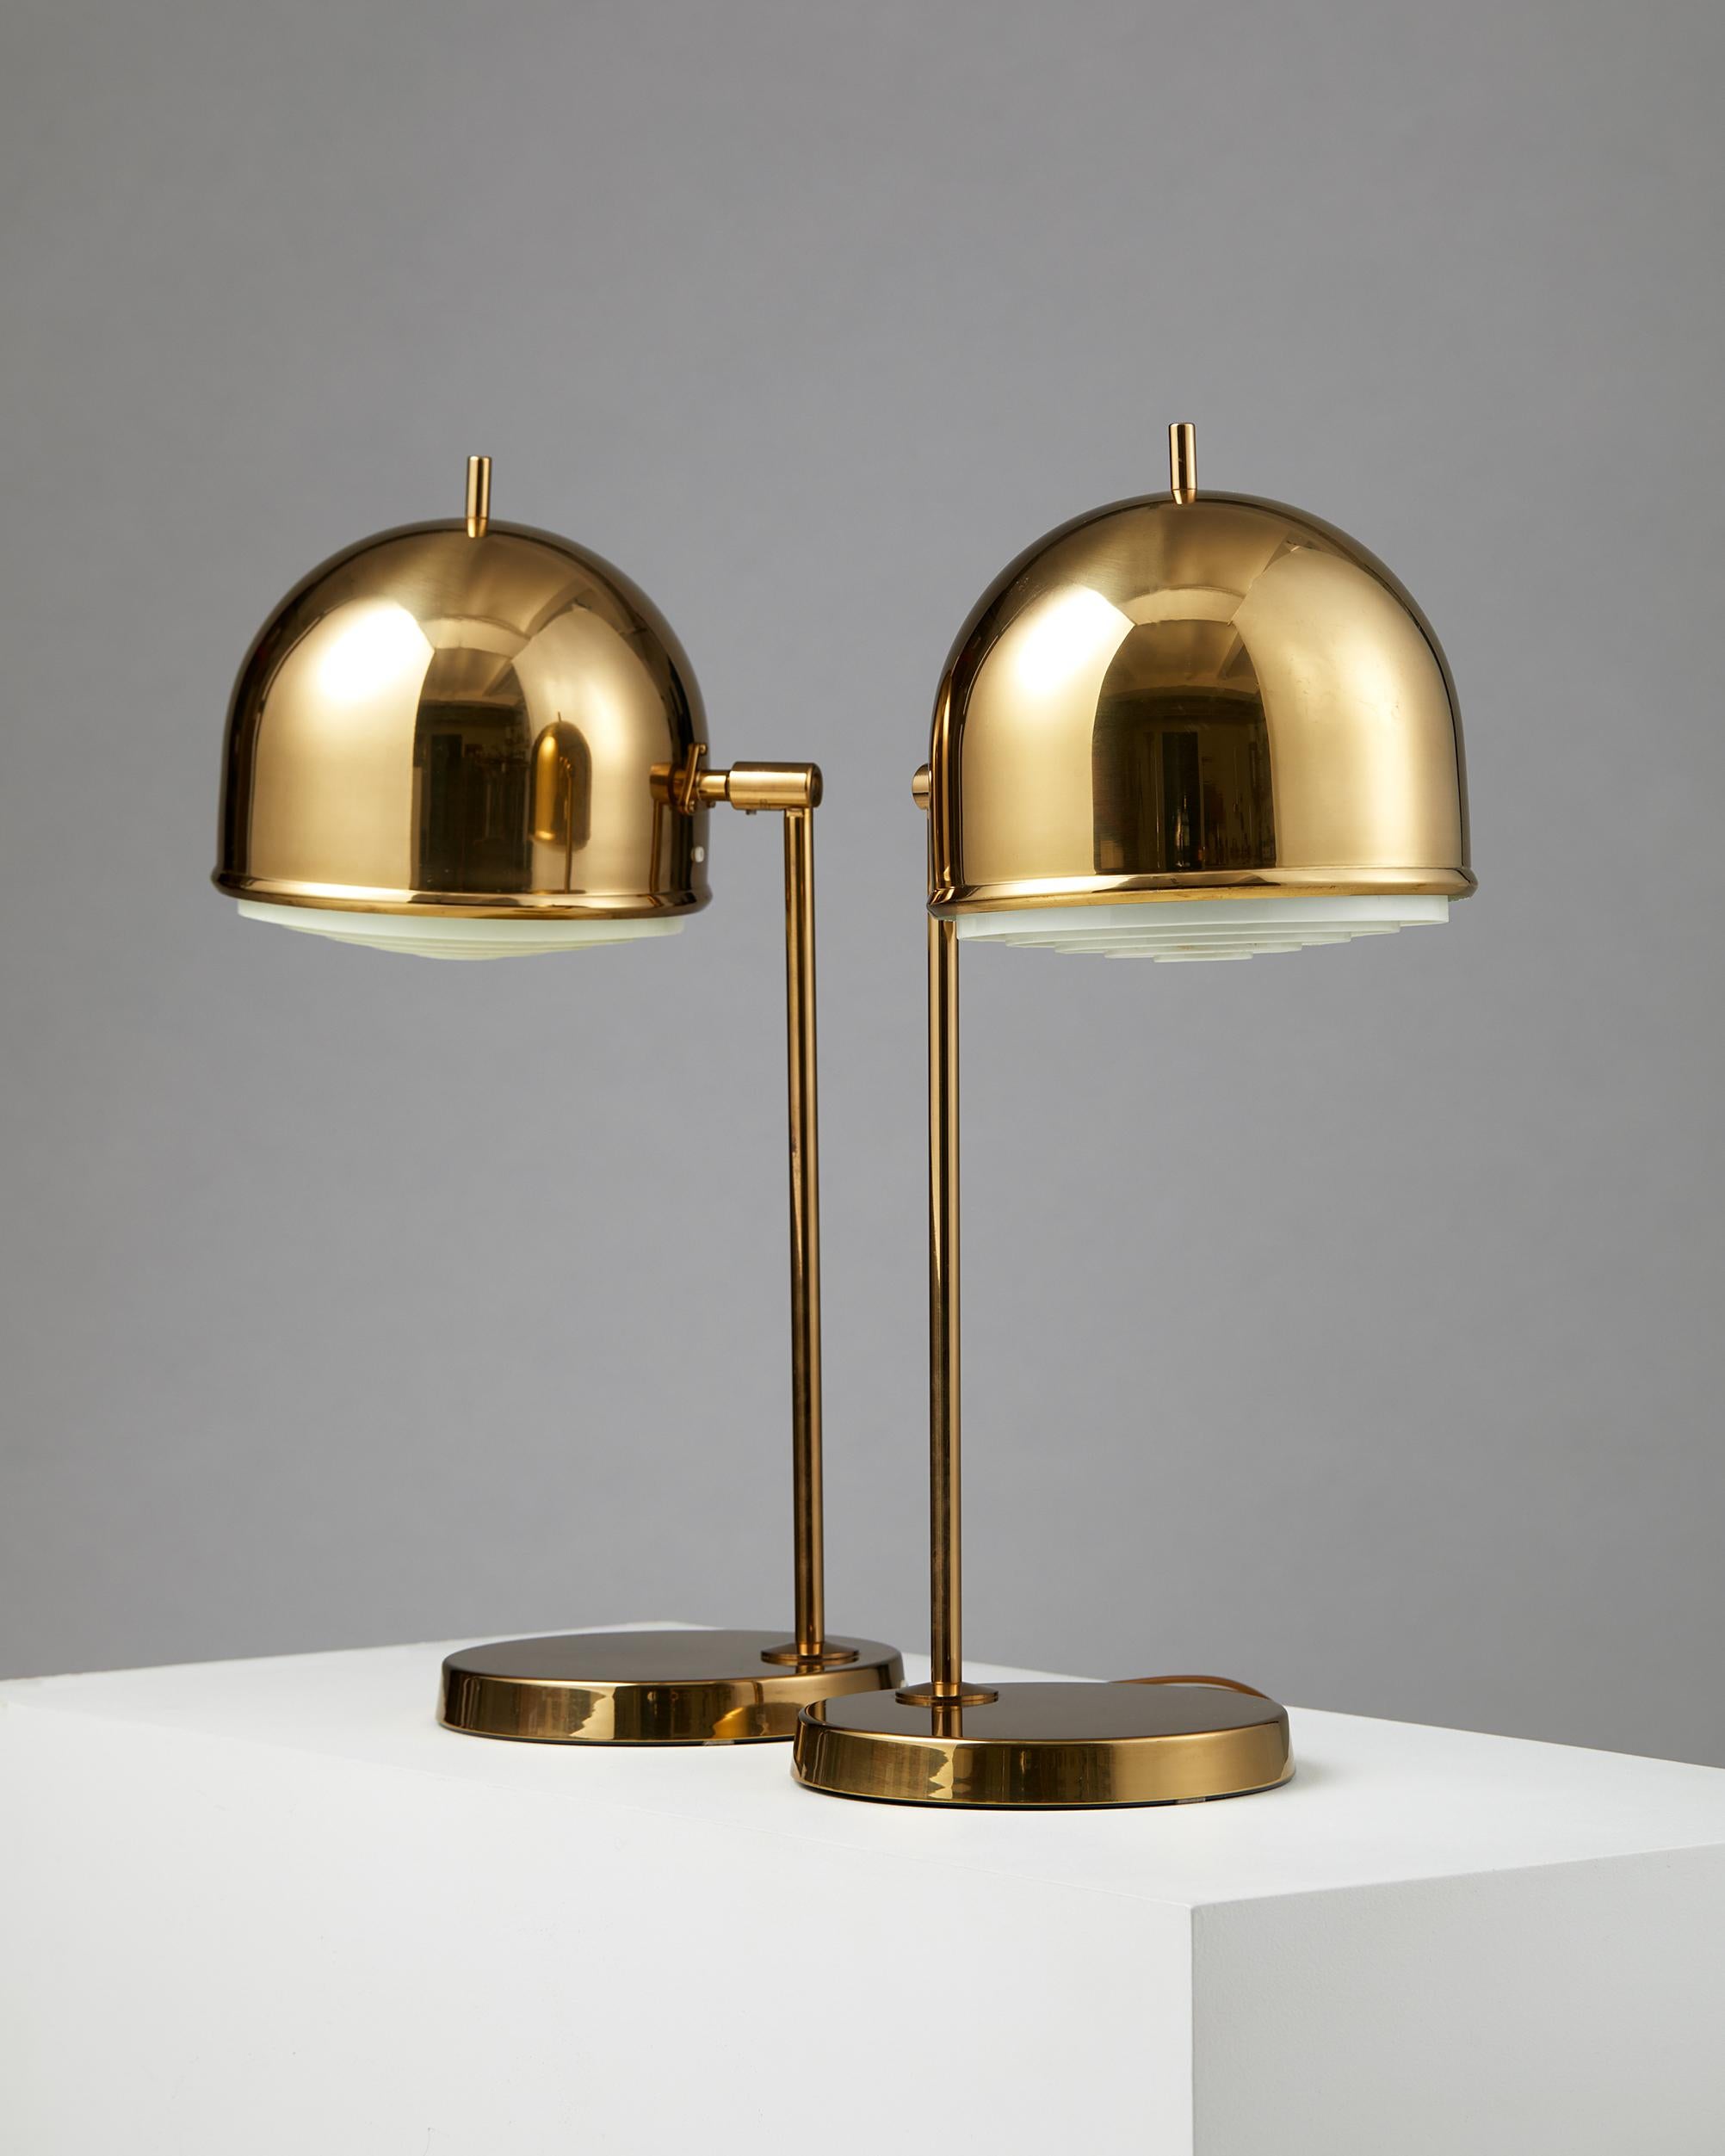 Mid-Century Modern Pair of Table Lamps Designed by Eje Ahlgren for Bergboms, Sweden, 1960’s